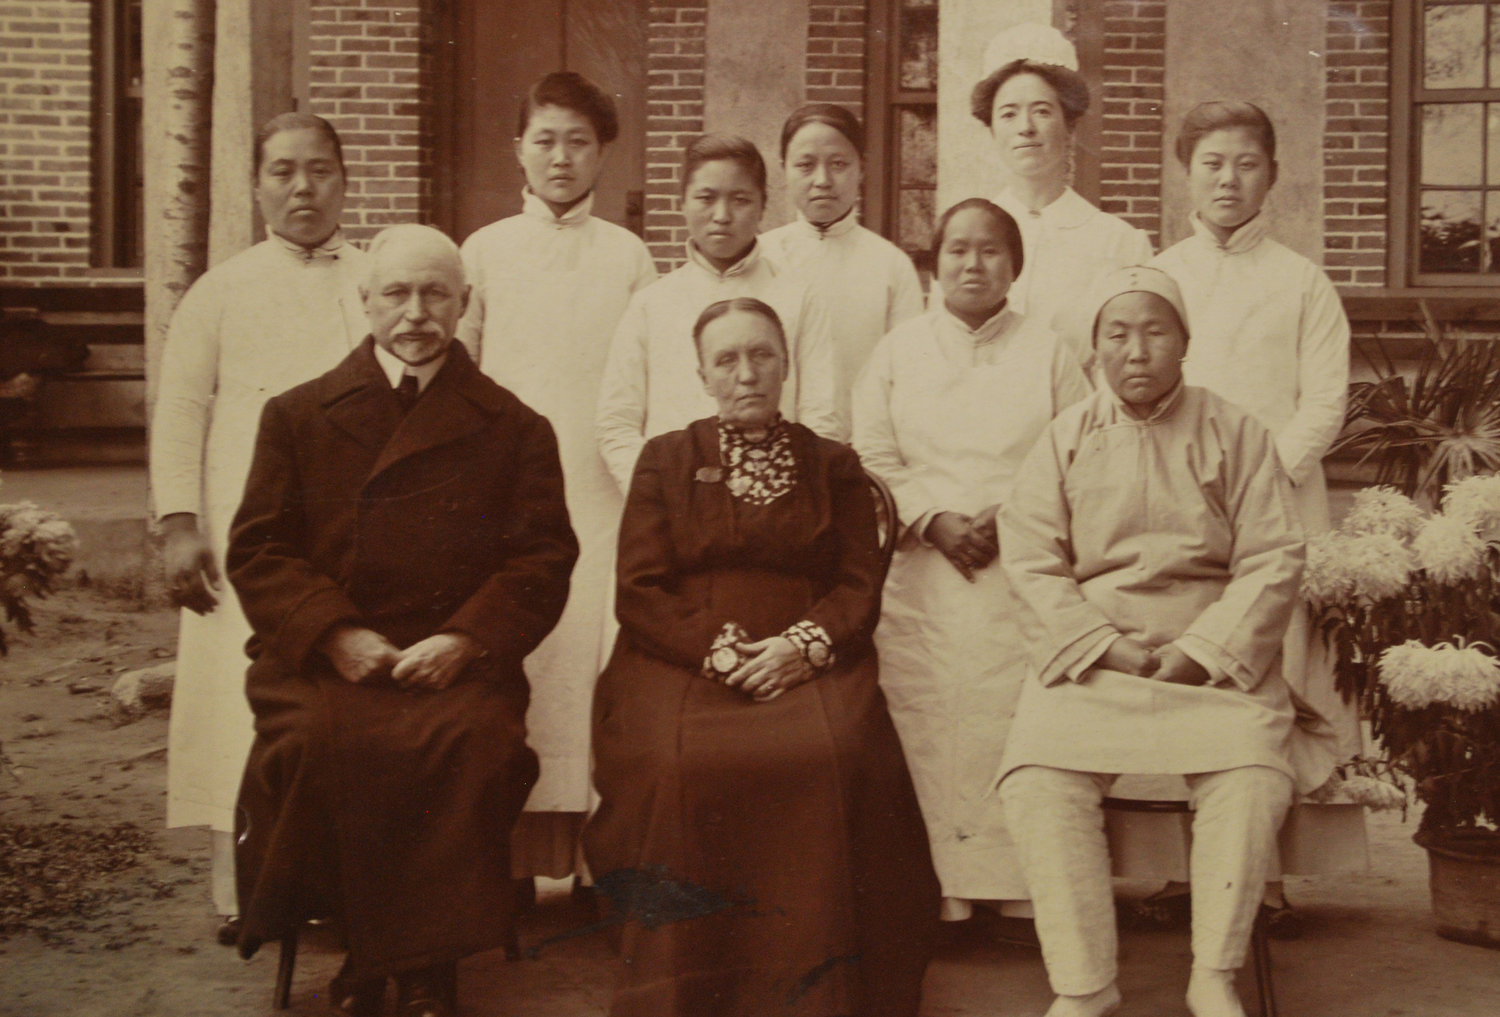 Dr. T.W. Ayers and his wife, both bottom left, pose with medical professionals in front of the Warren Hospital in Hwang Hien, China.